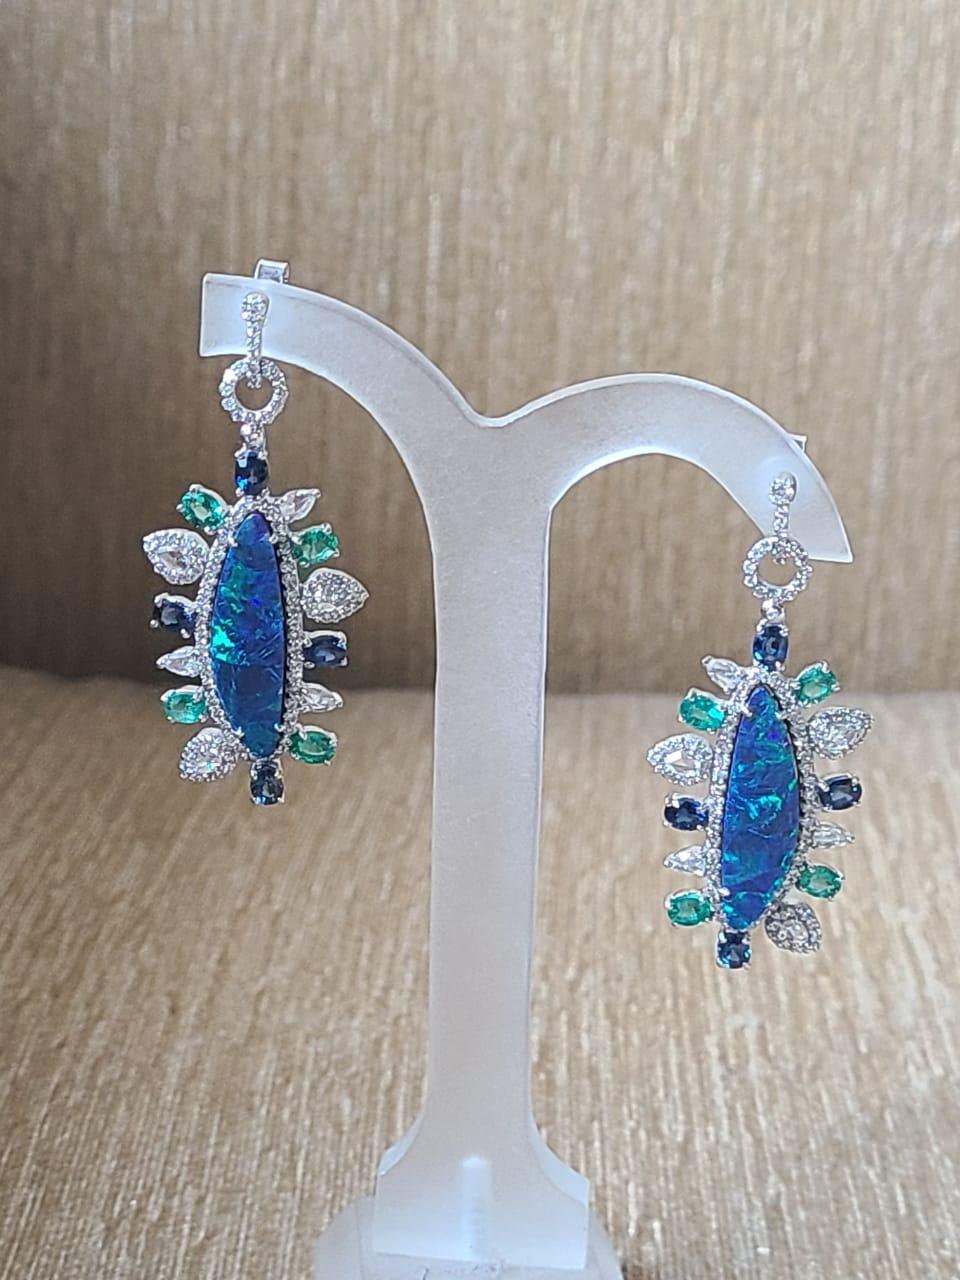 A very gorgeous and one of a kind doublet Opal, Blue Sapphire, Emerald Chandelier Earrings set in 18K Gold & Diamonds. The dimensions of the Earrings are 4.50cm x 2.00cm x 1.00cm (L x W x H). The earrings have a simple pull - push mechanism for